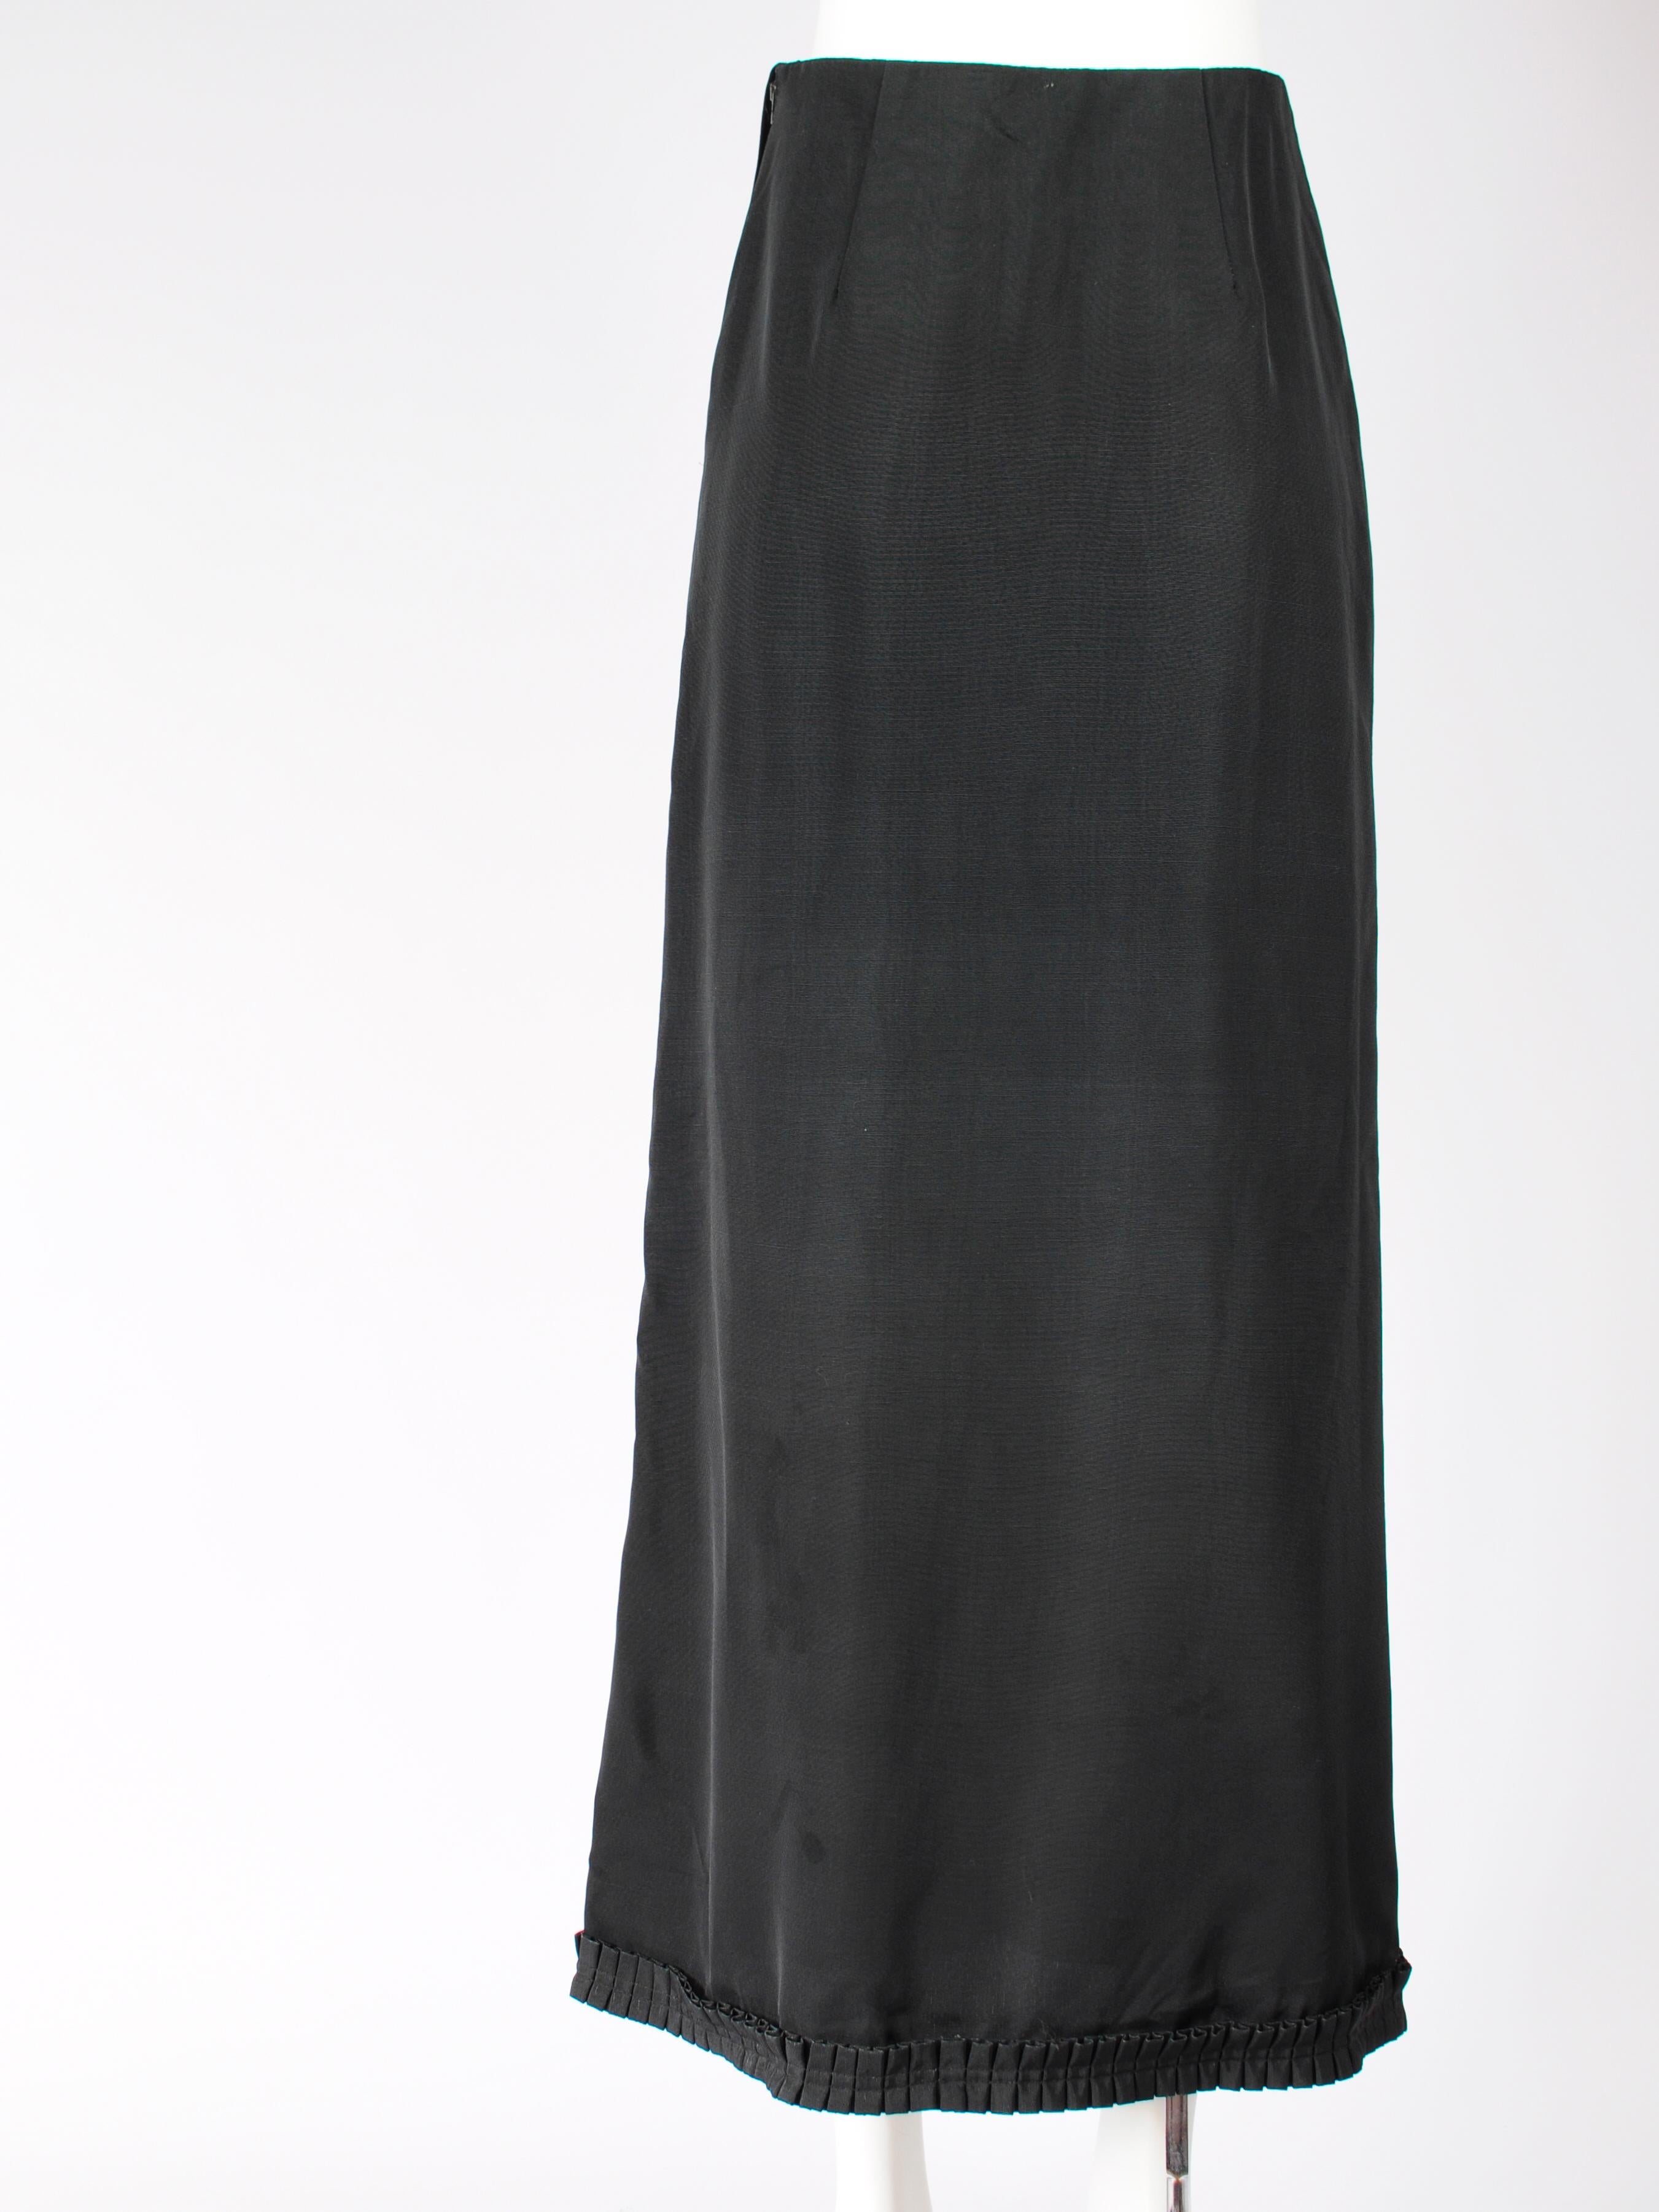 Mary Quant Ginger Group Maxi Skirt A-Line with Bow Ruffle Hem 1960s For Sale 1